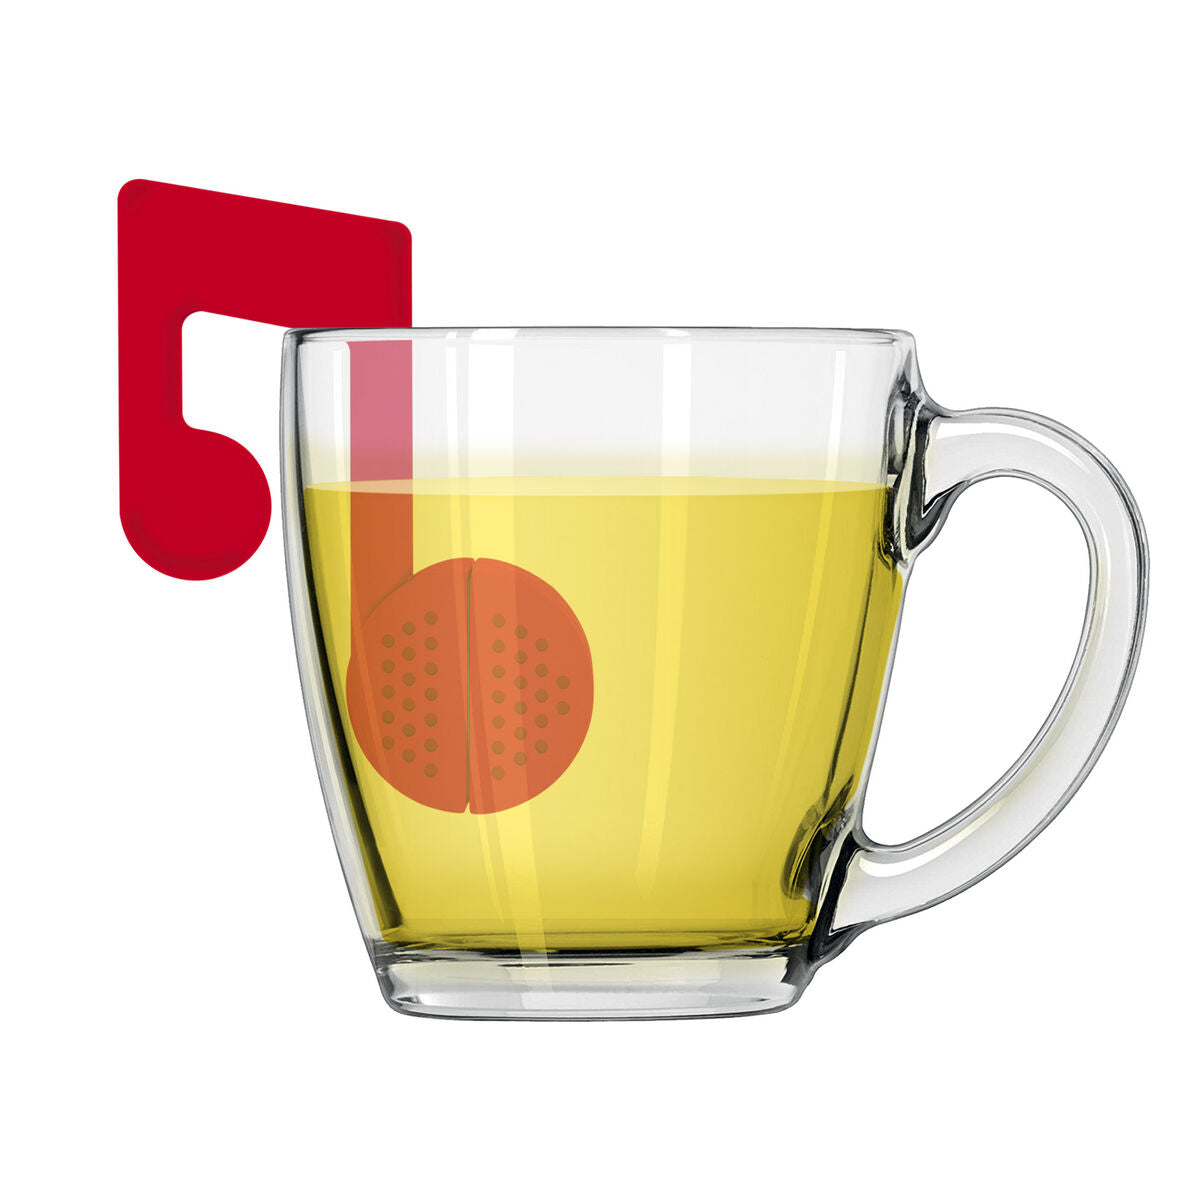 Fab Gifts | Legami Music Note Tea Infuser Red by Weirs of Baggot Street